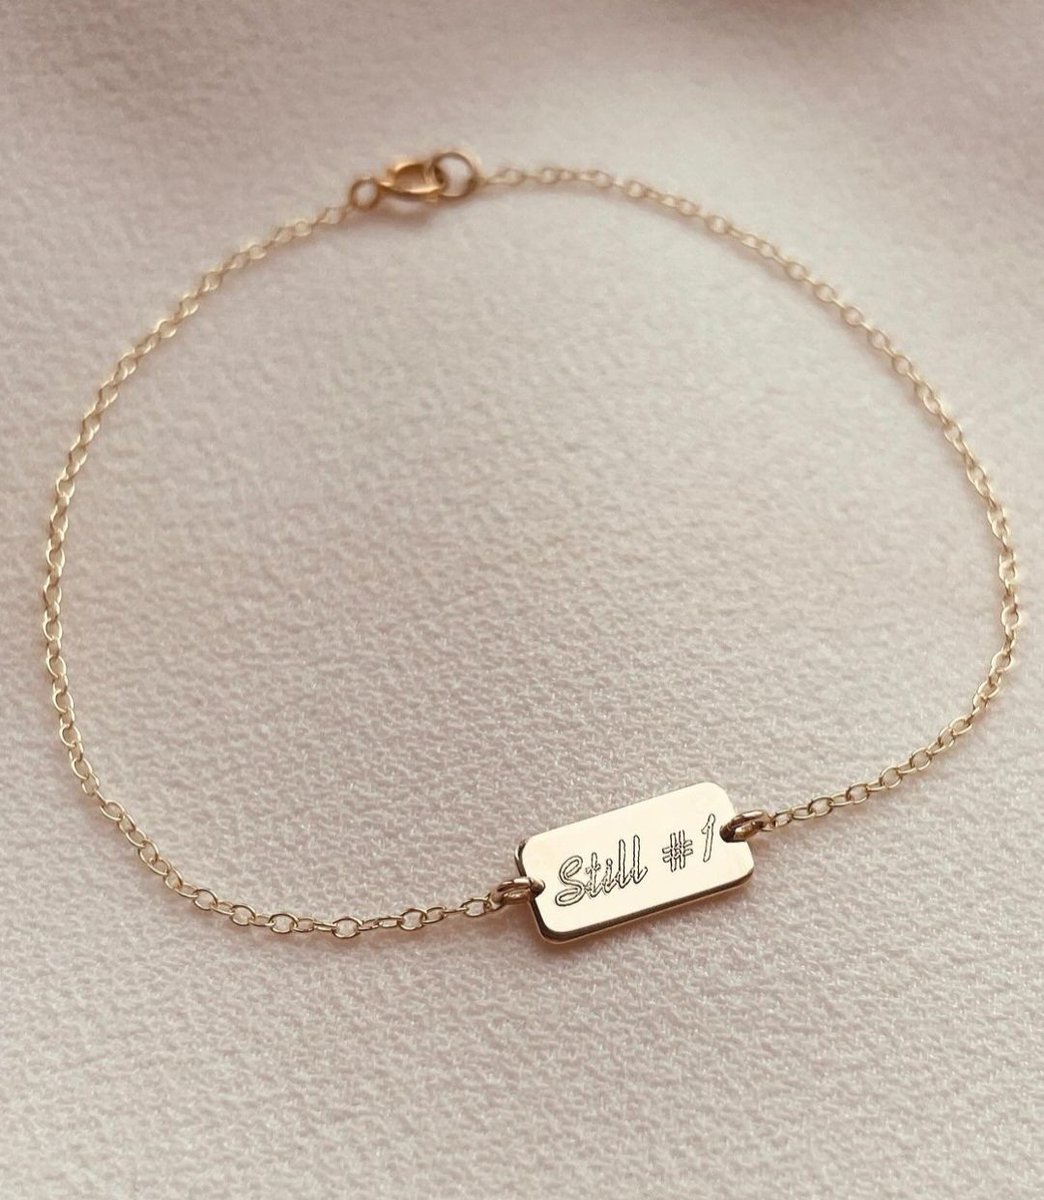 Jewellery with a message  from @ByLeahy can be engraved with your own message for that special gift #Irishfashion #necklace #chain #bracelet #gift #jewellery #birthdaygift #christeninggift #irishdesign #Irishfashionart #CIFD